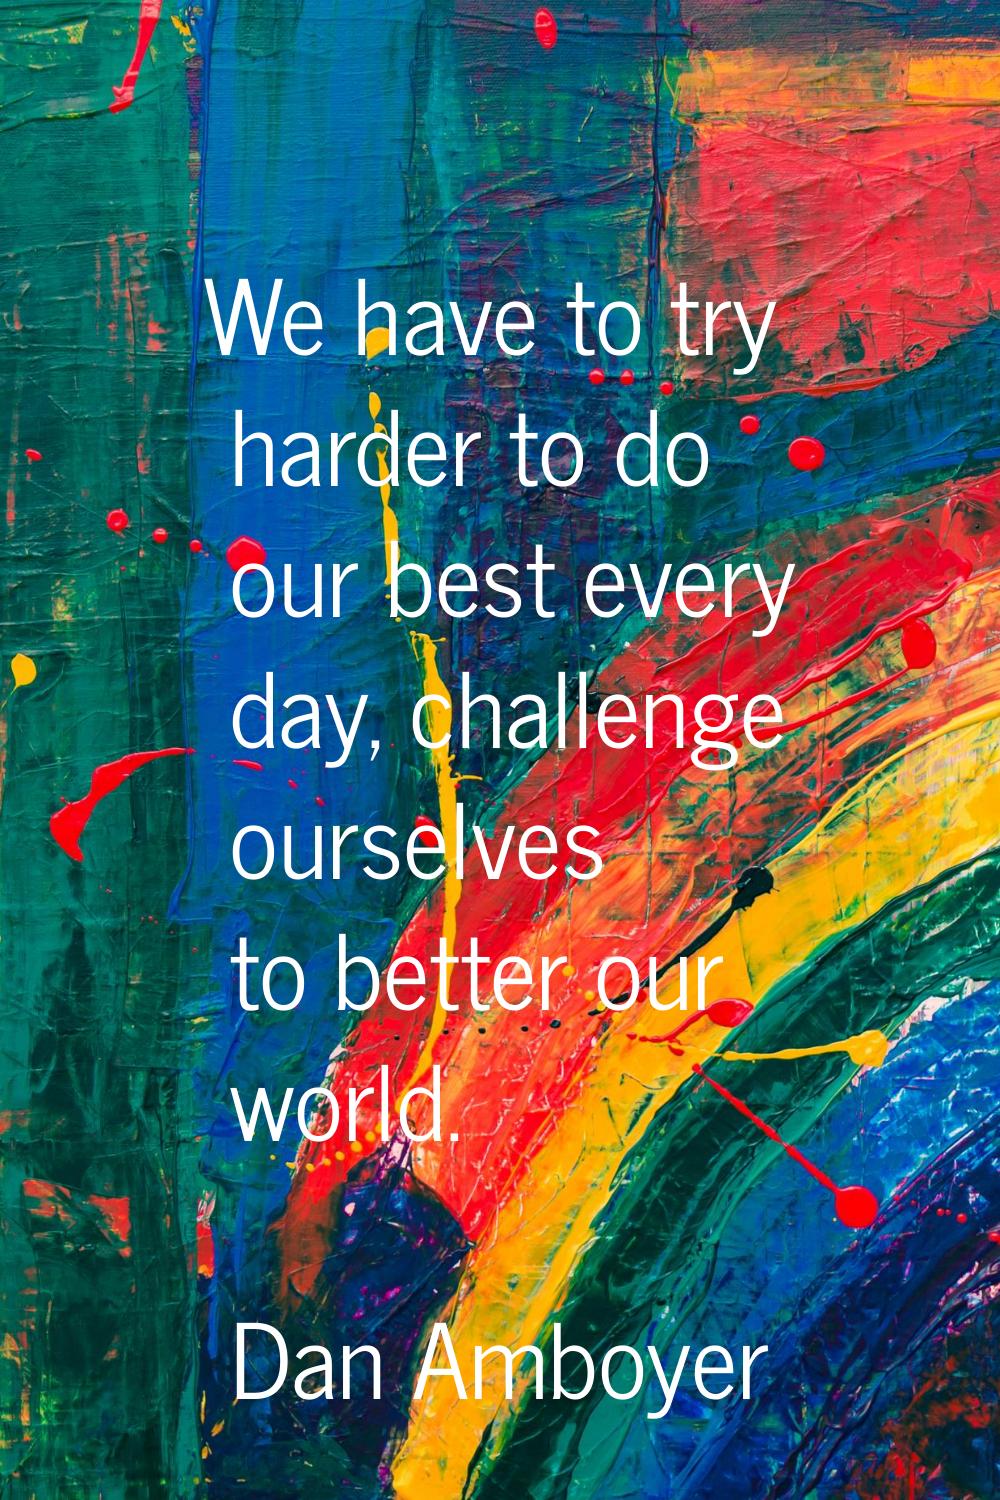 We have to try harder to do our best every day, challenge ourselves to better our world.